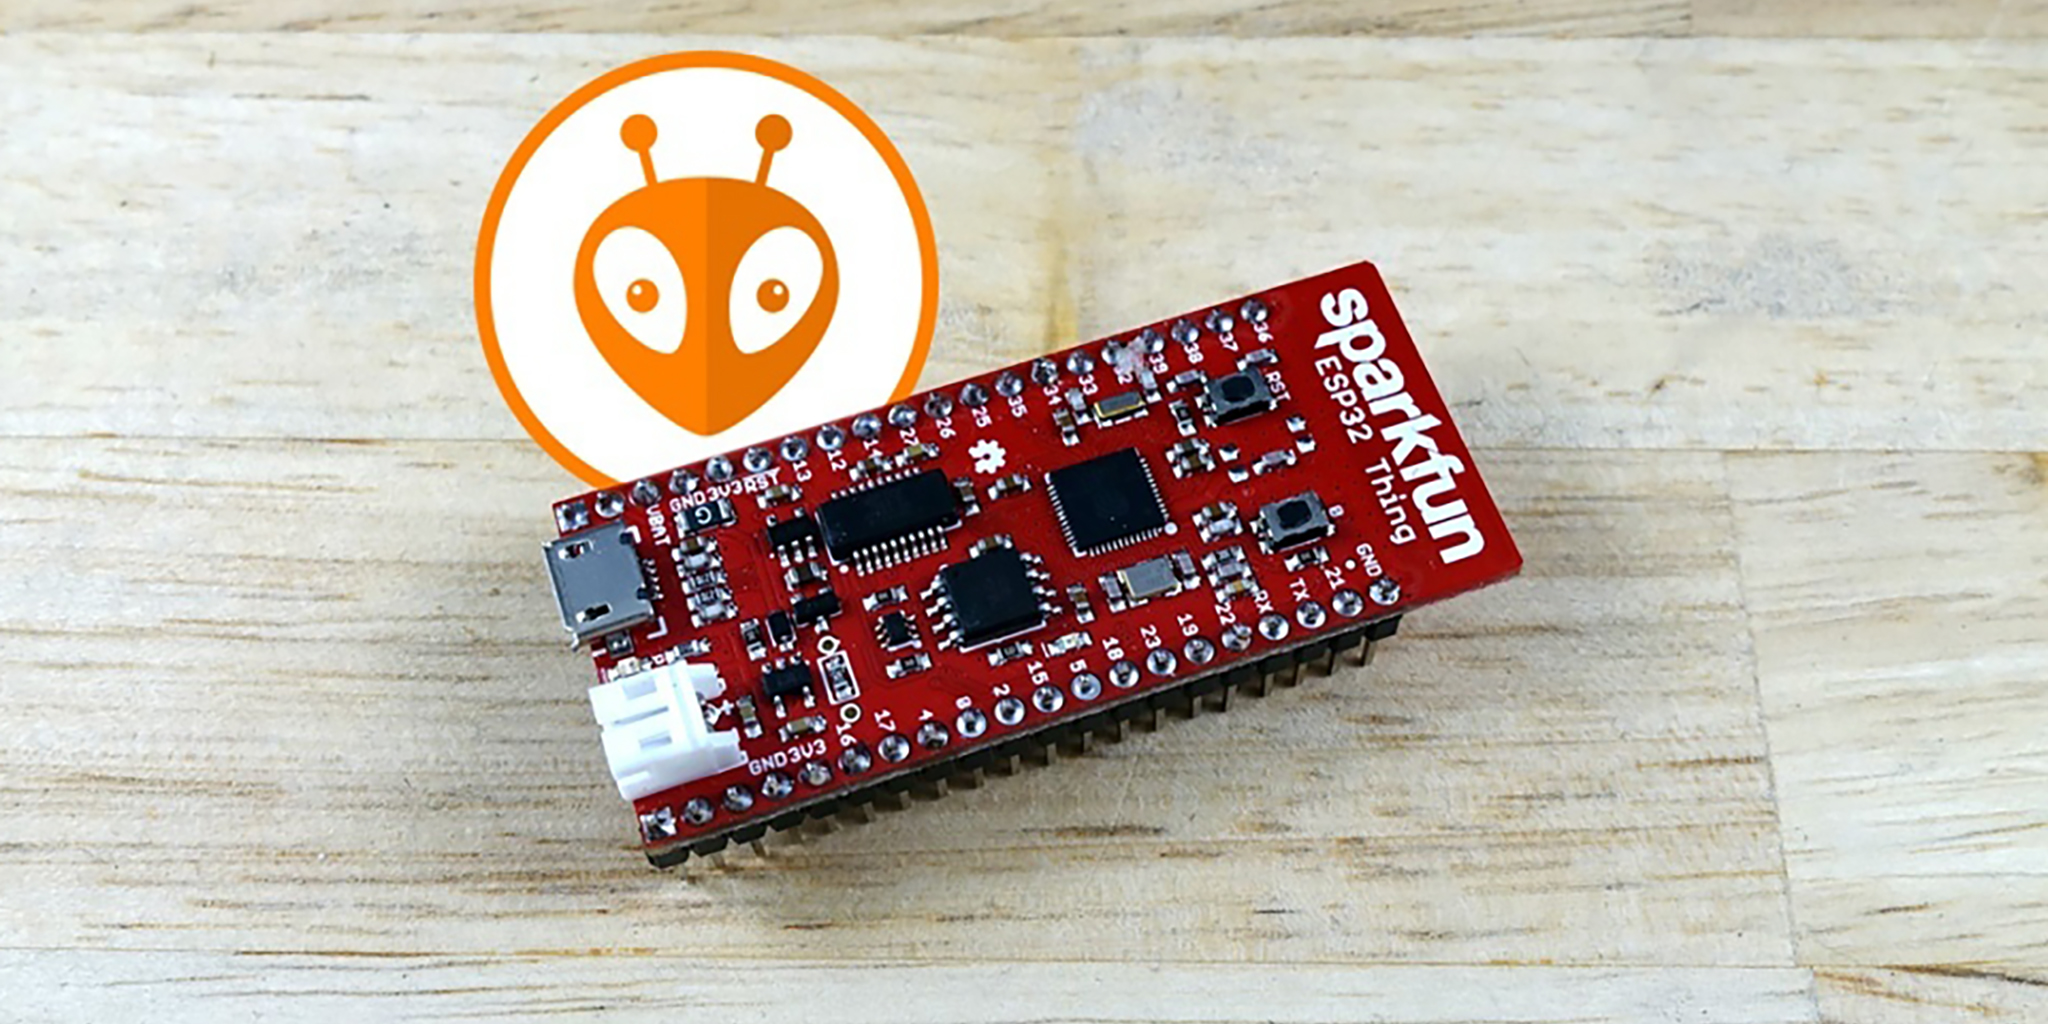 Getting Started With ESP32 and PlatformIO